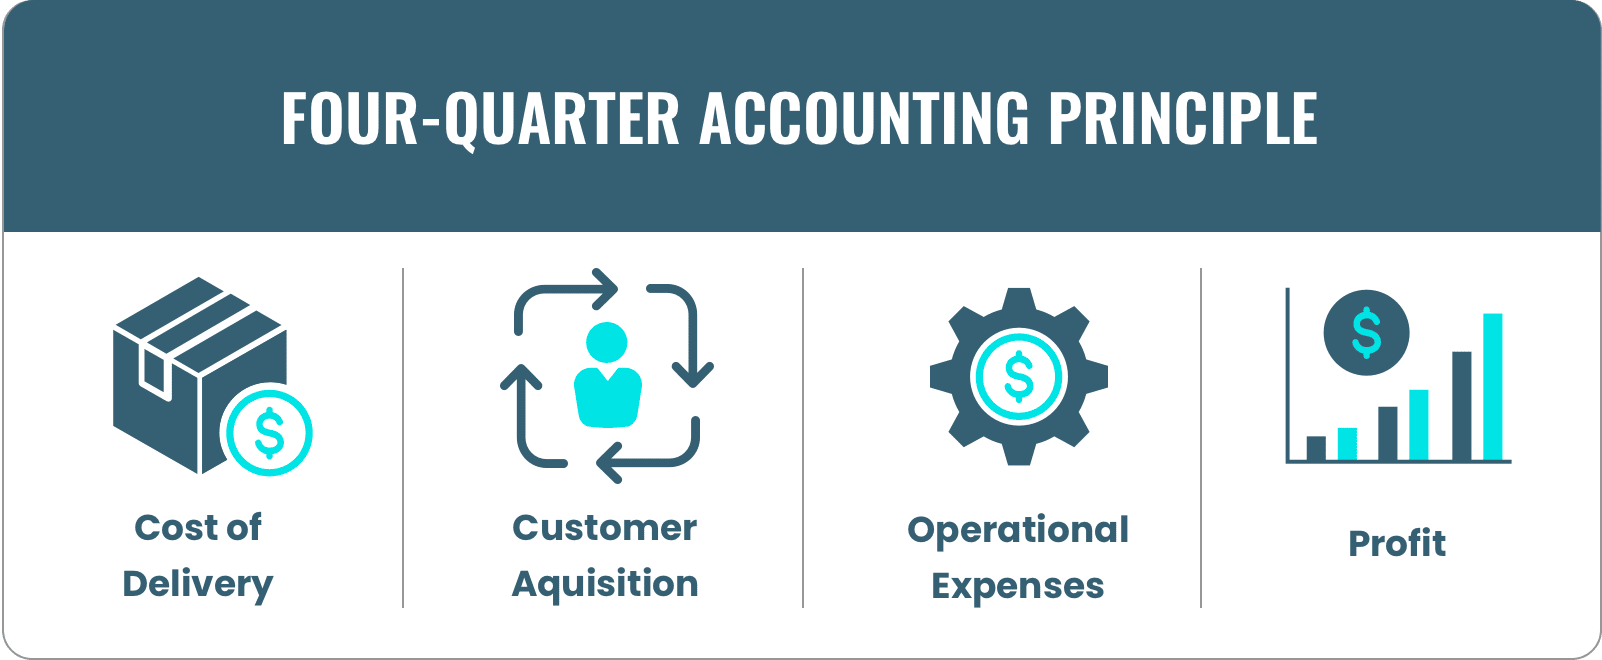 Four-Quarter Accounting Principle for Digital Ecommerce Brands: cost of delivery, customer acquisition, operational expenses, profit